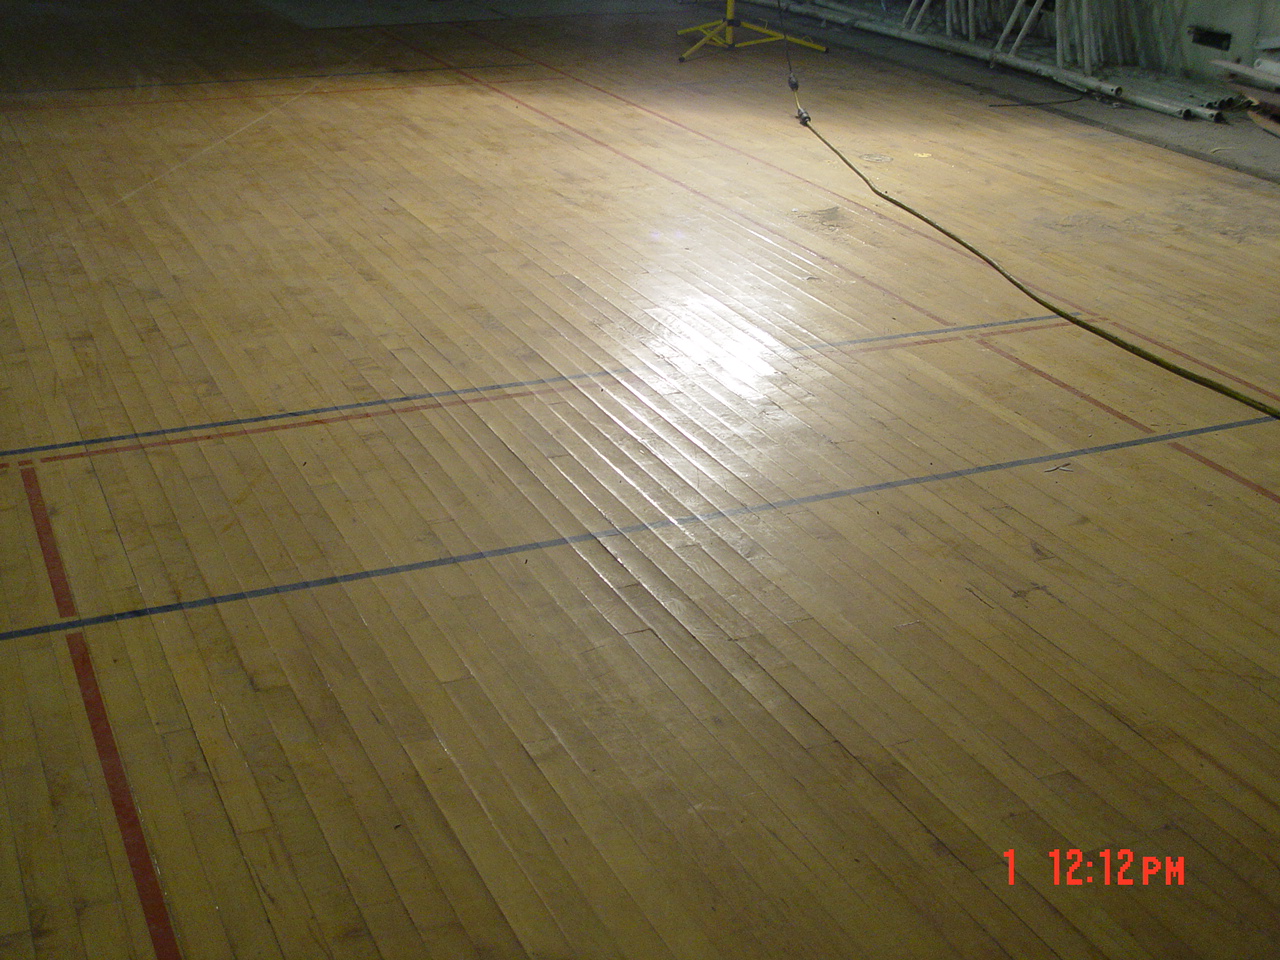 Gymnasium floor cupping after water damage